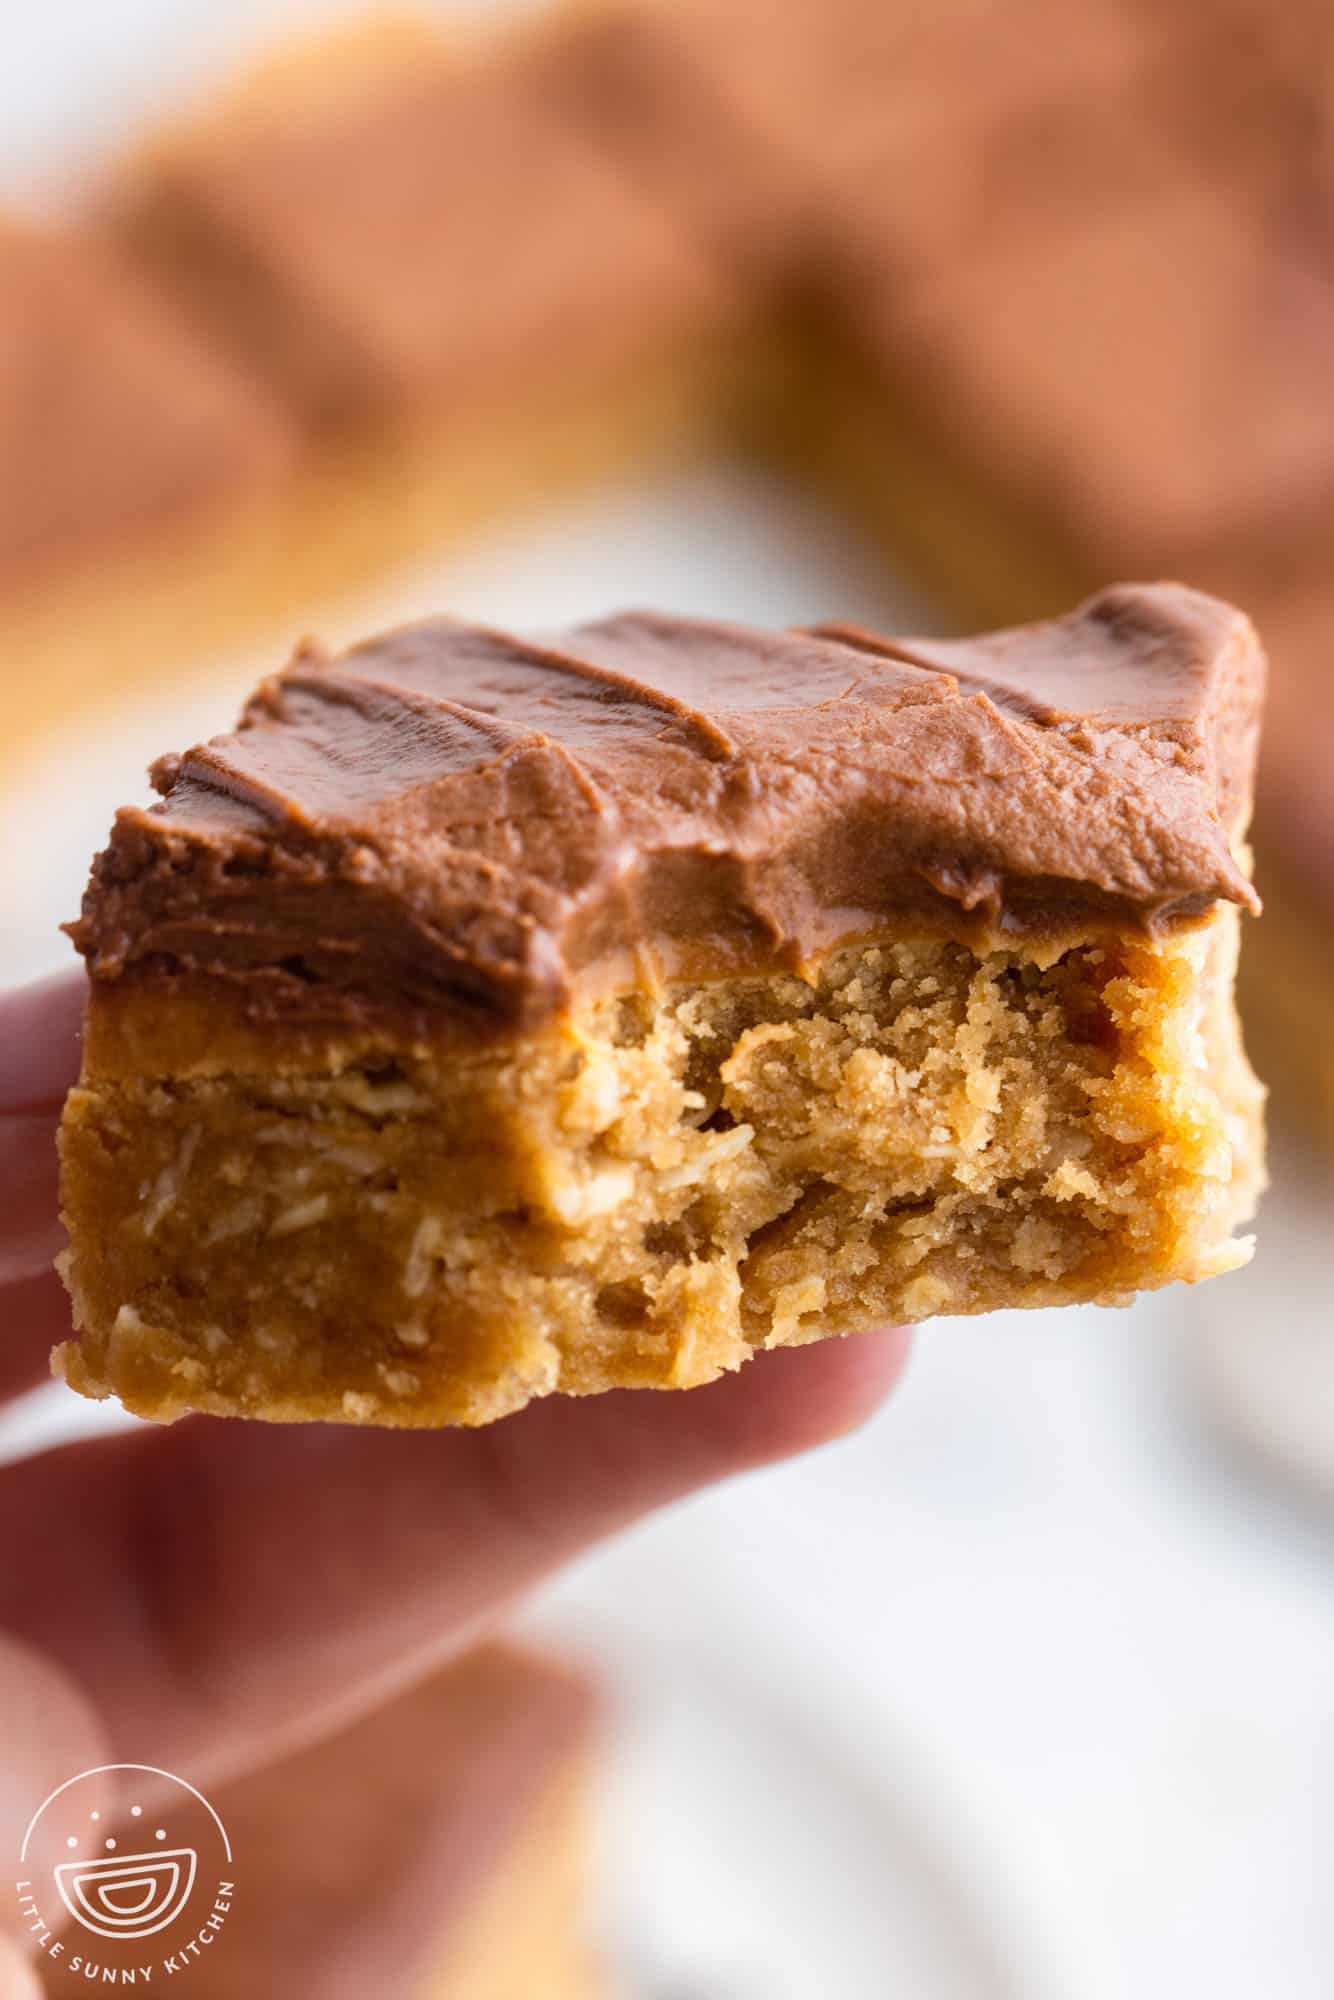 lunch lady peanut butter bar with chocolate frosting, held up with a bite taken.